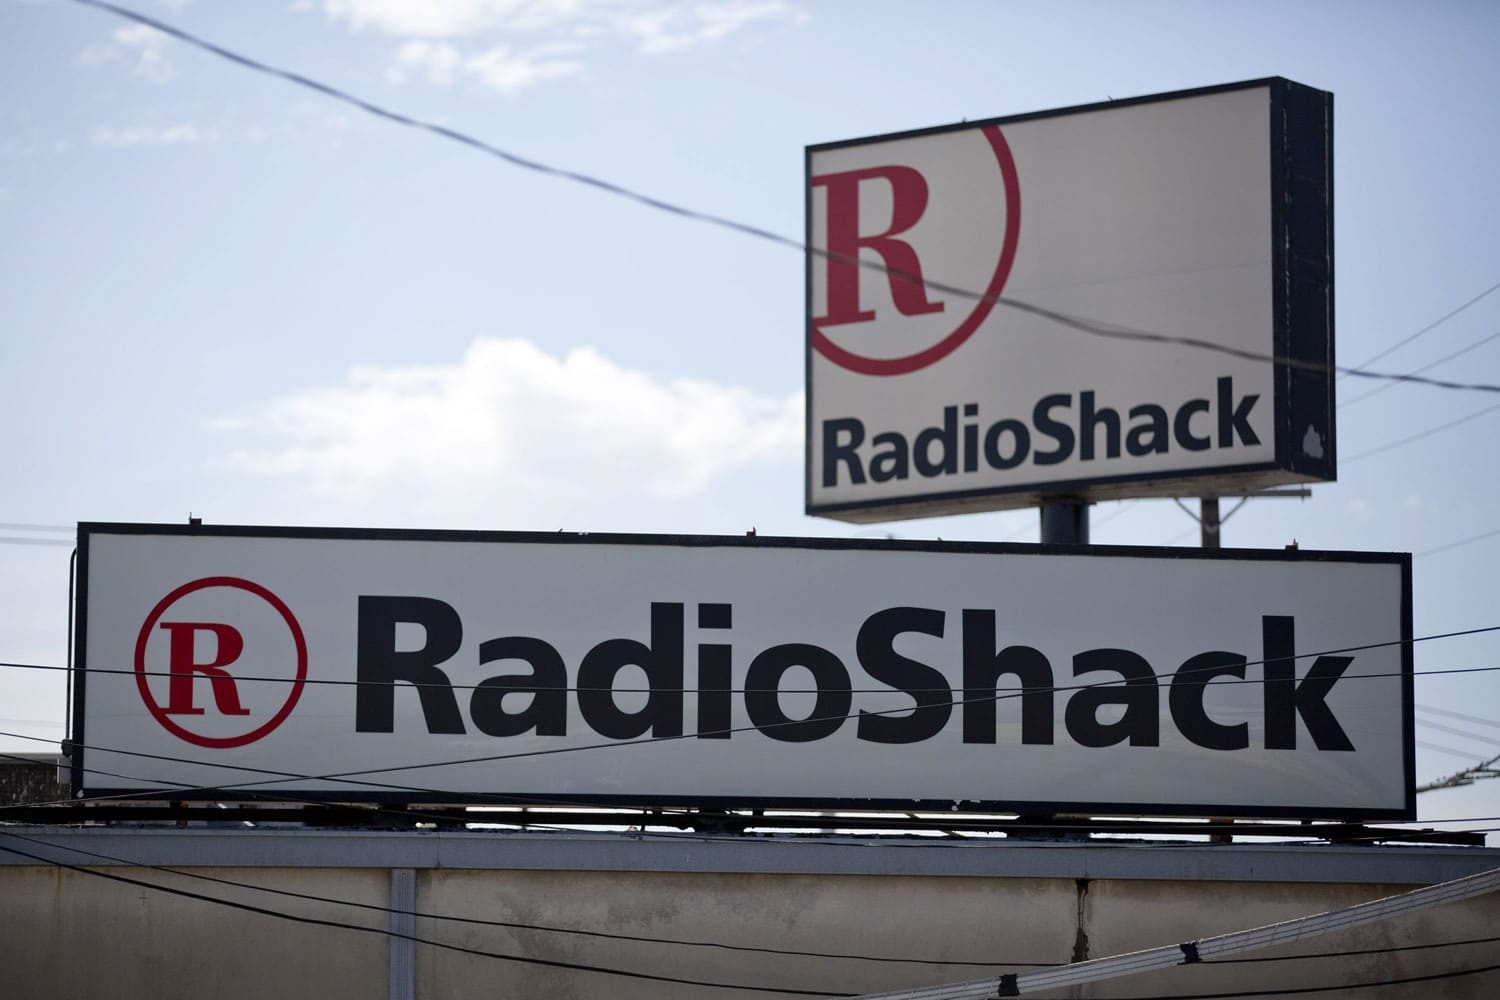 RadioShack, Staples and Aeropostale are among major retailers that have announced store closures in recent weeks.